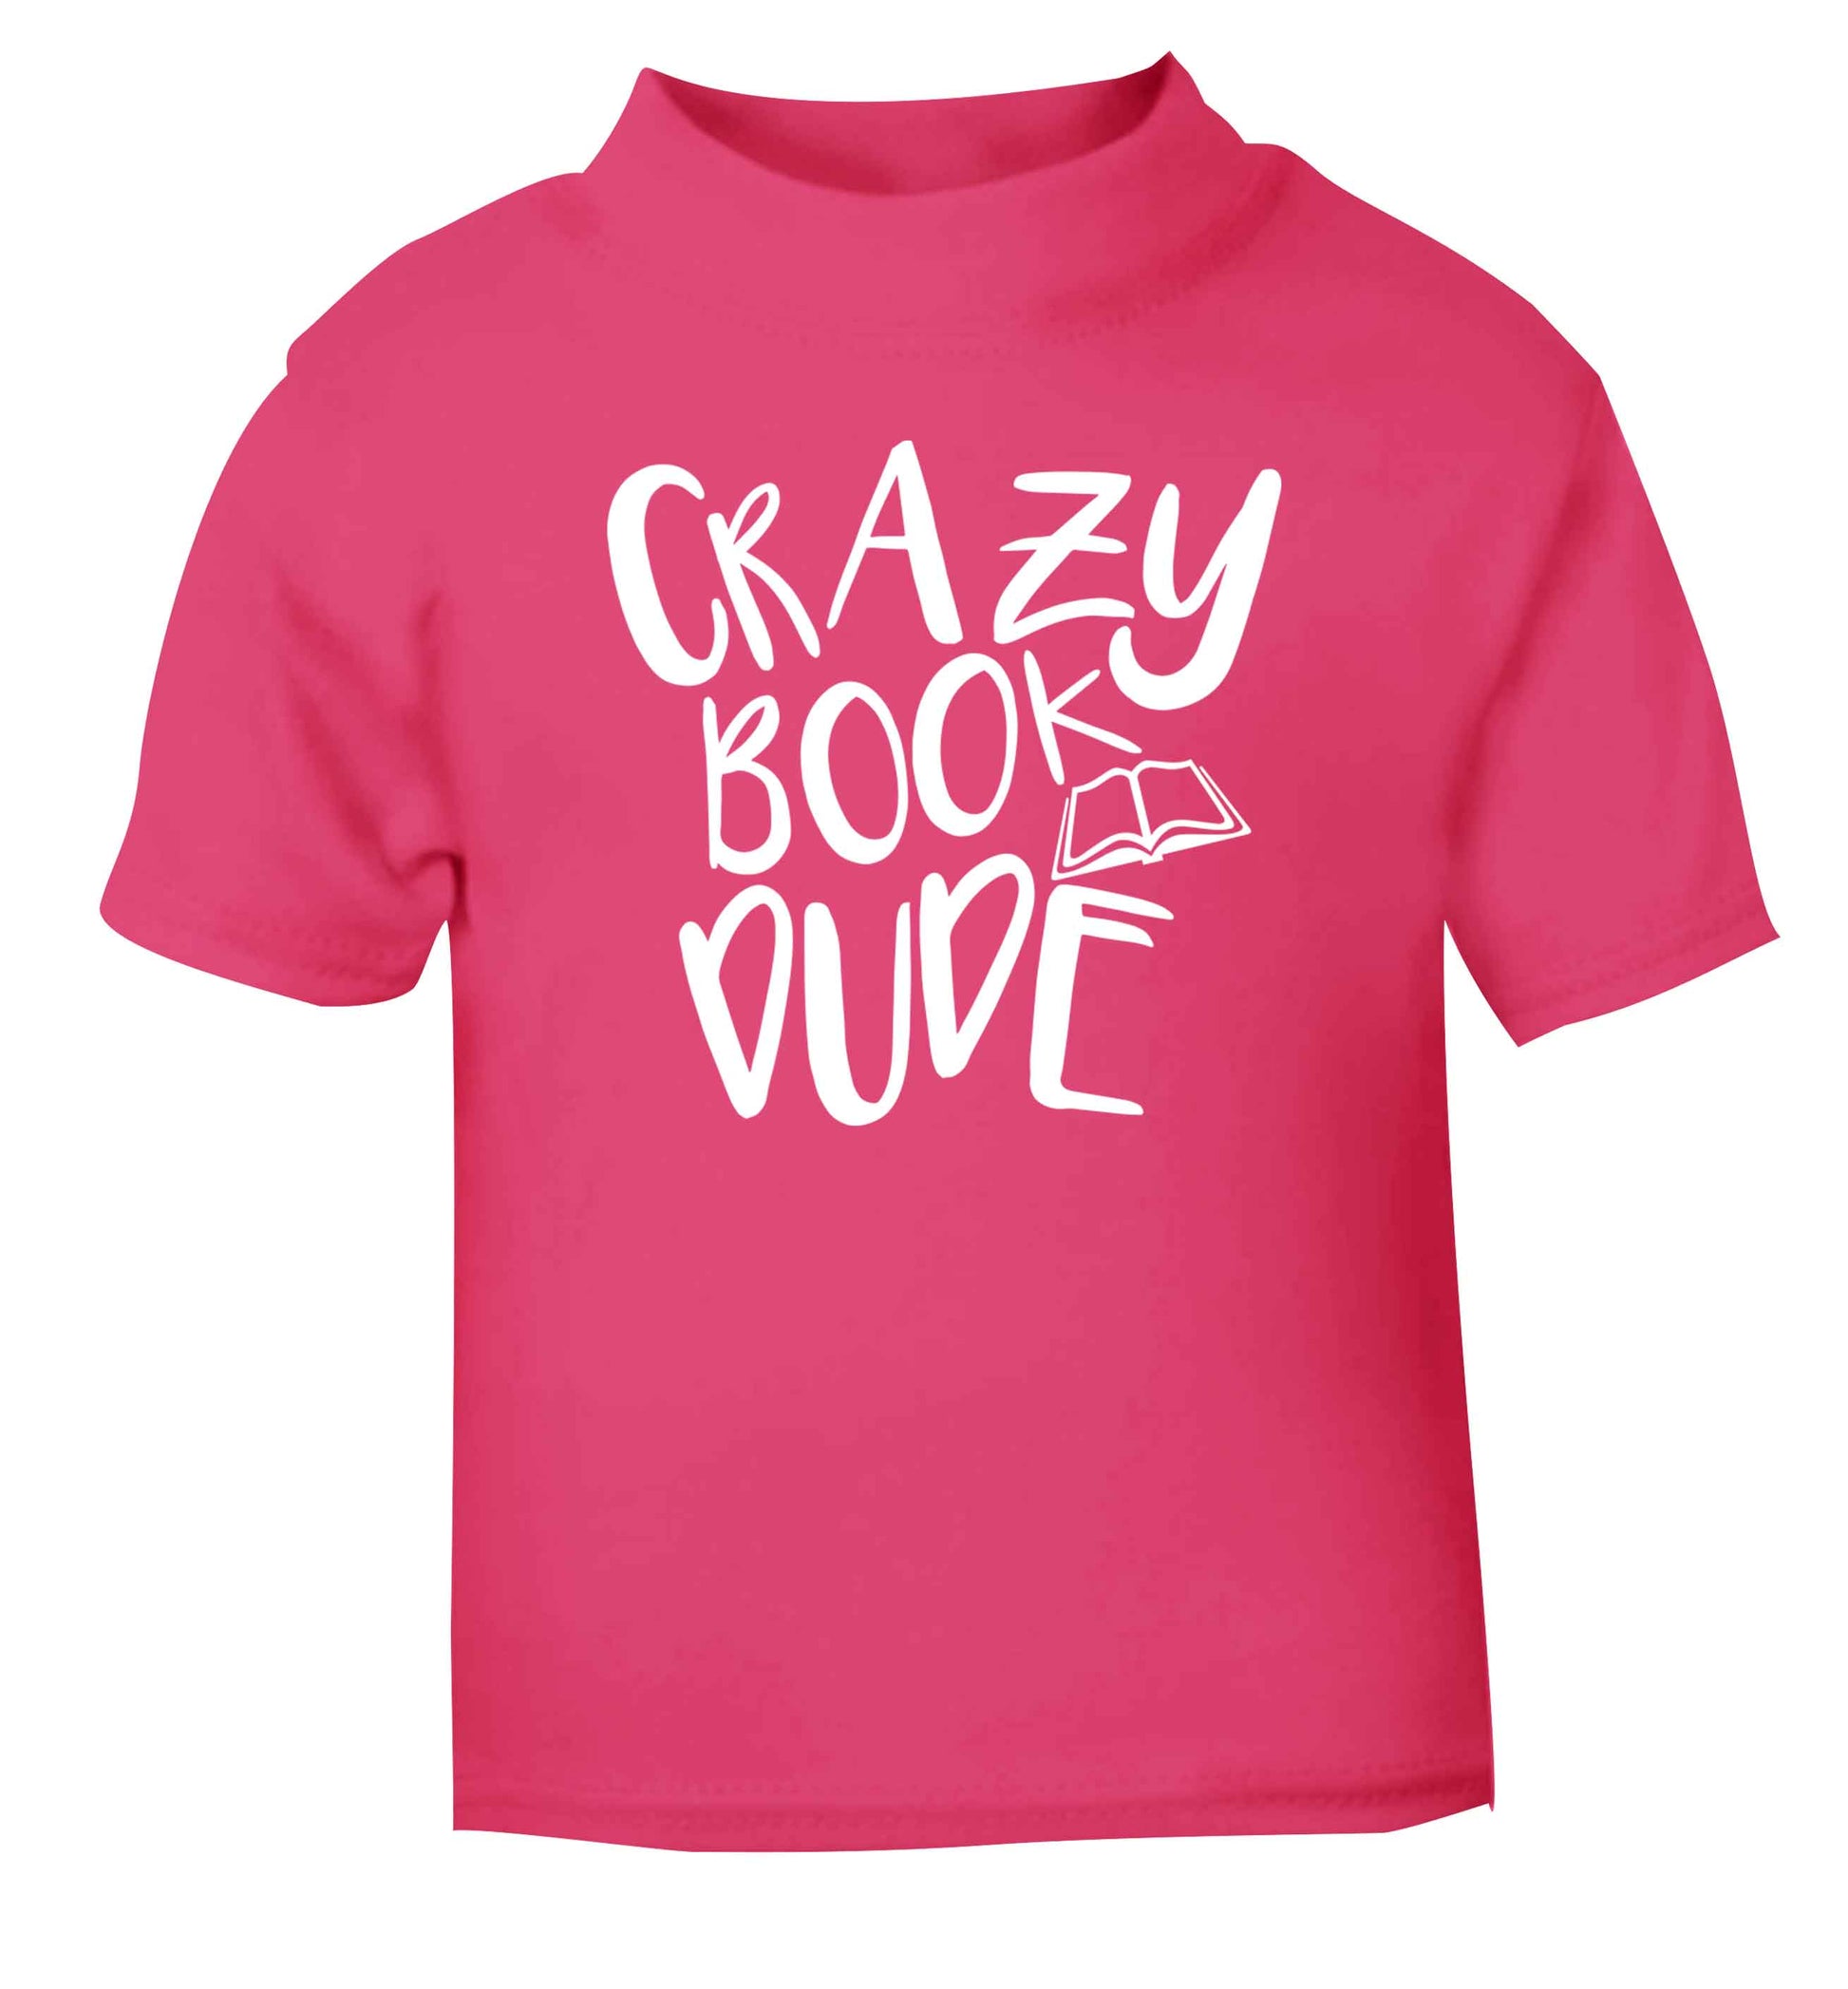 Crazy book dude pink Baby Toddler Tshirt 2 Years